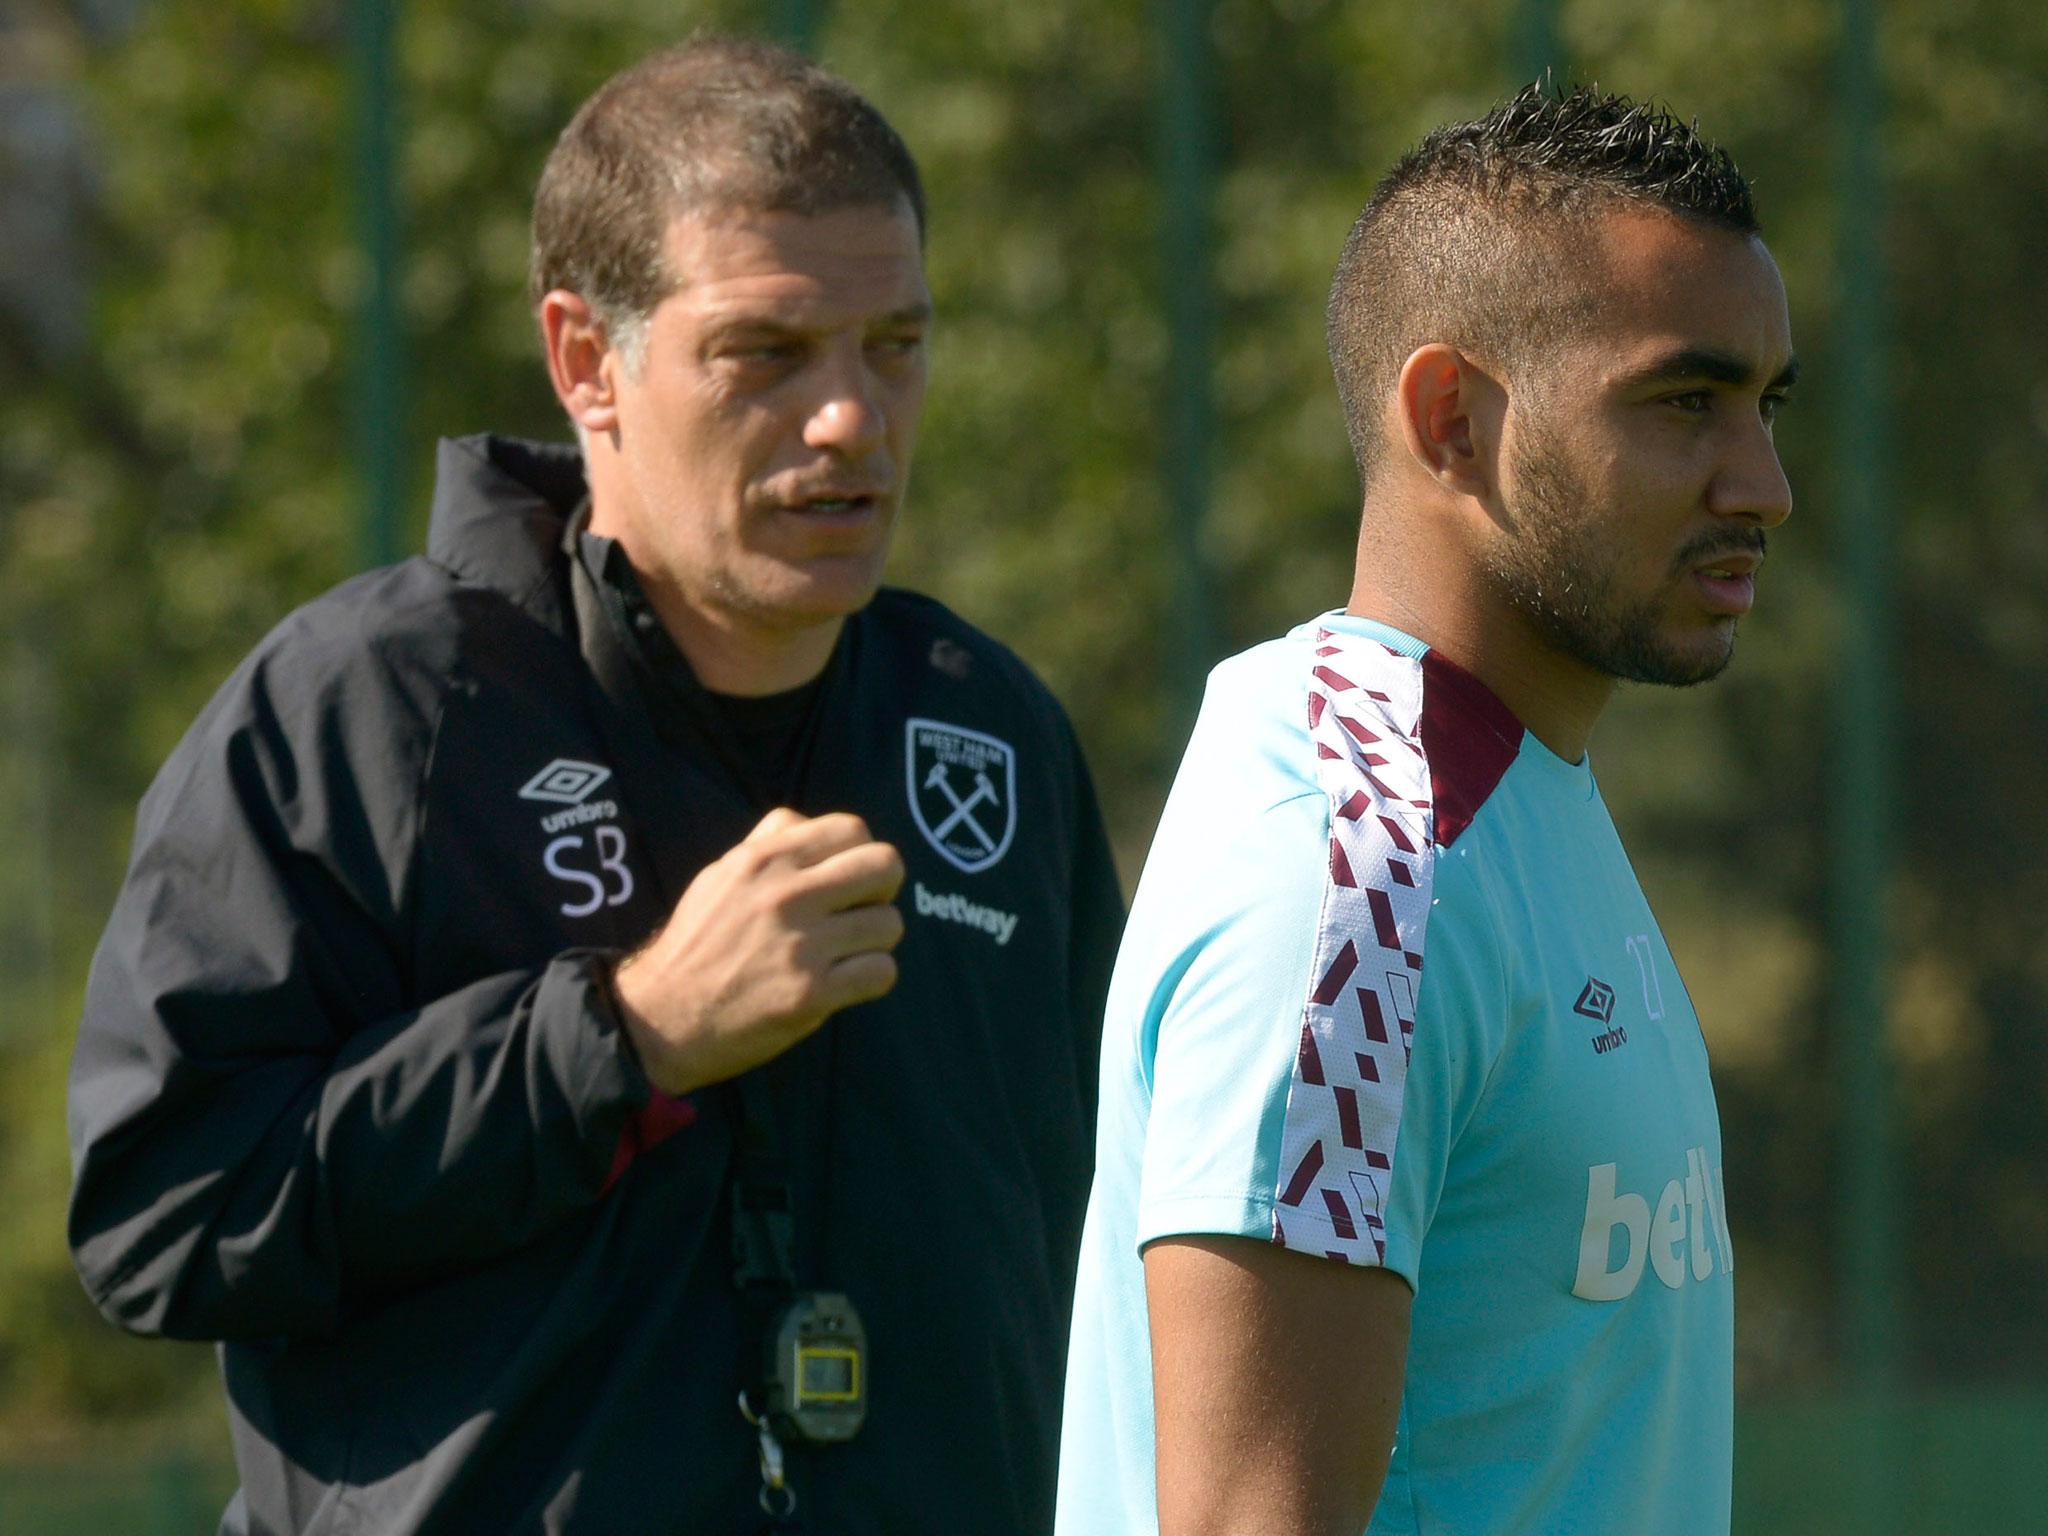 Slaven Bilic has banished Dimitri Payet from the West Ham squad after he refused to play for the club